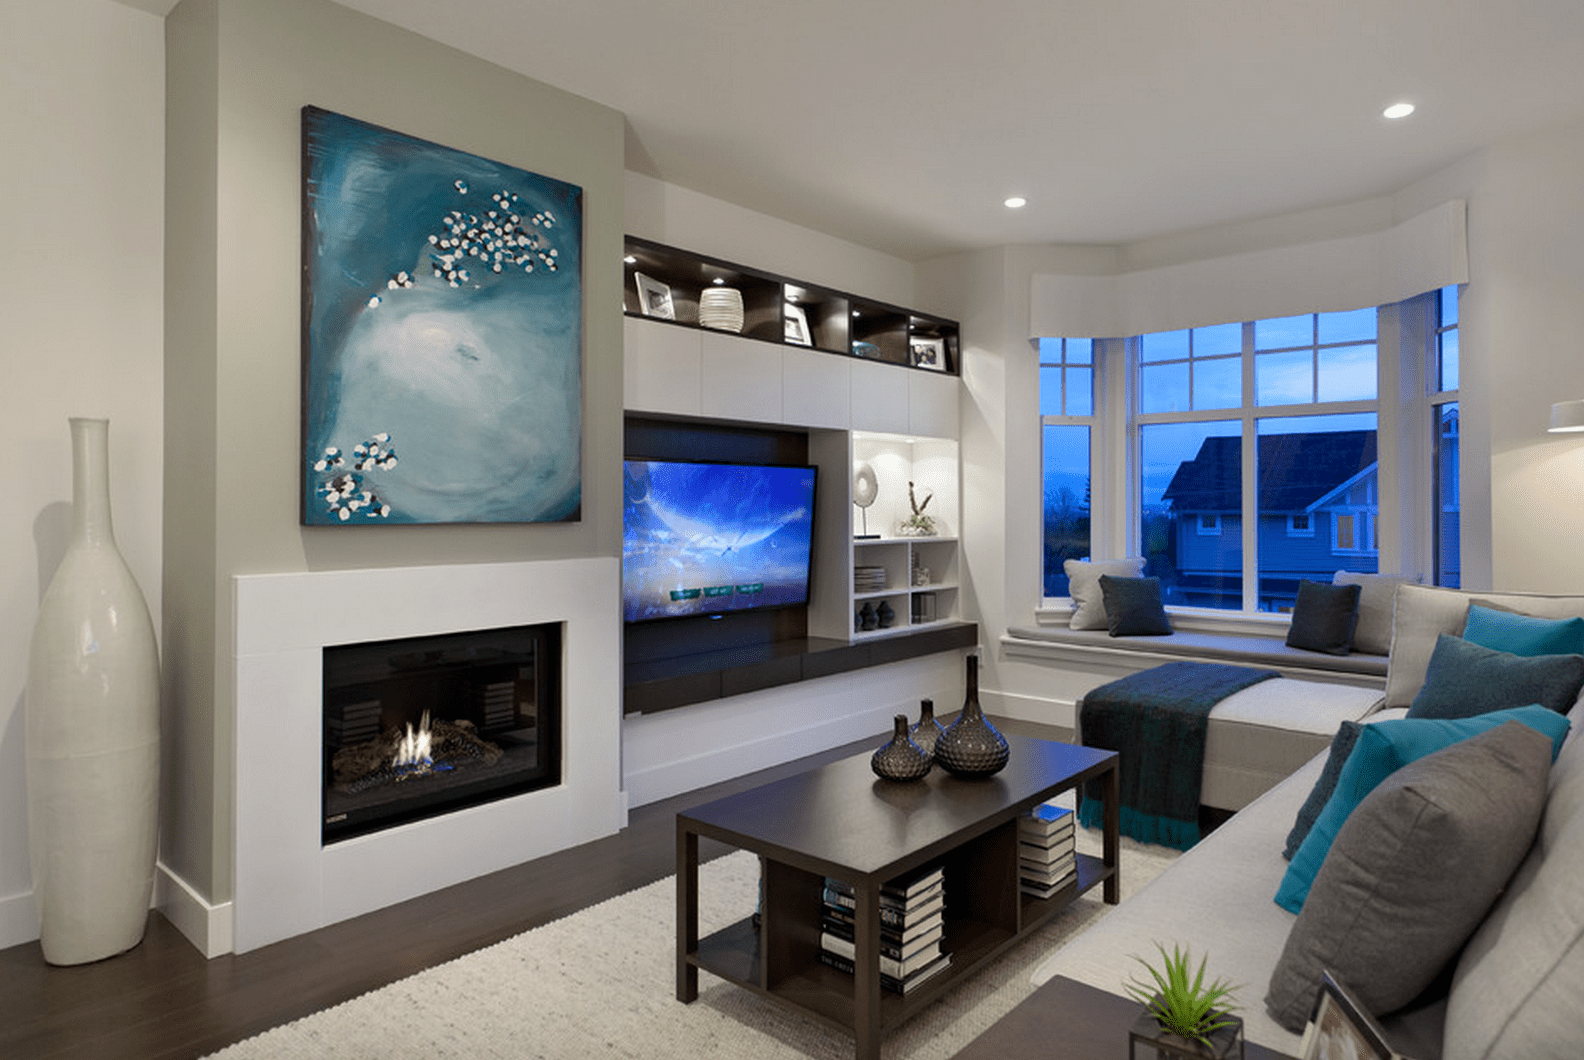 Tv Fireplace Wall Unit Designs Awesome Beautiful Living Rooms with Built In Shelving